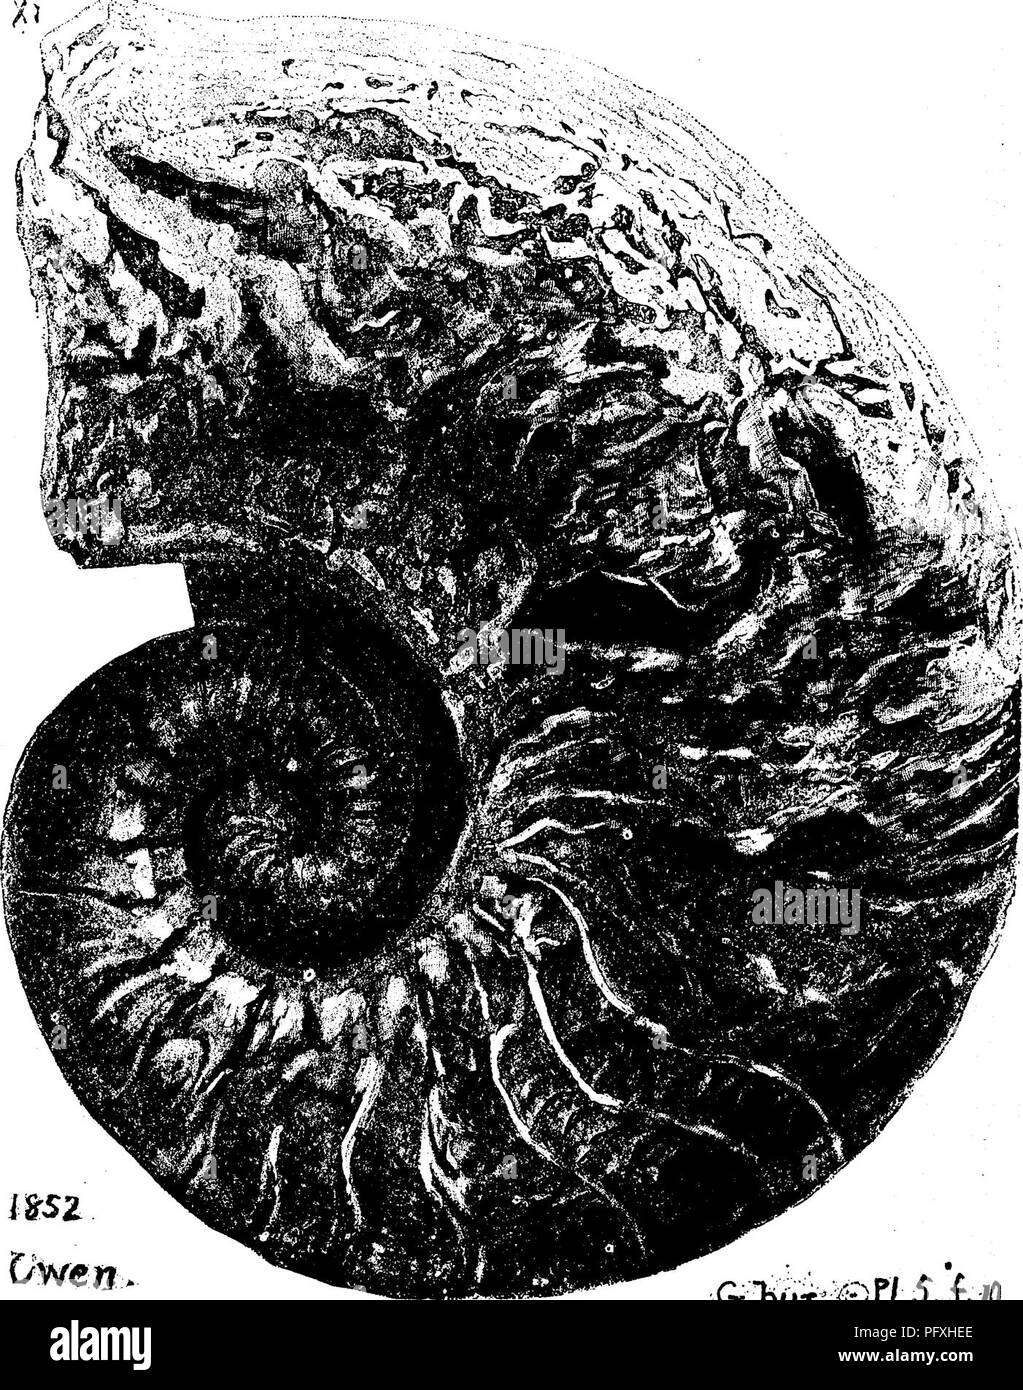 . A dictionary of the fossils of Pennsylvania and neighboring states named in the reports and catalogues of the survey ... Paleontology. 26' Gyra. Gyracanthus magnificus, Dawson, Acad. GeoL, 1868, p. 310, fig. 55 a; ''^' * Fig. 55a.—Sjpme—Gyracanthus magnijicus, N,S., reduced, a magllificent fish spine, ?'^ t w e n t y -1 w o V/^ (22) inches long, (fig. re- duced to y) found by Mr. Barnes, in the Cape Breton (Sydney) Coal Measures.—XIII, Gyroceras burlingtonensis. Owen, Geo]. Wis., 1852, pi. 'I^cii^^ ^';, Acad.^eoi' /S6^,. G^:bivrt^TLS,i,j(i. Please note that these images are extracted from sc Stock Photo